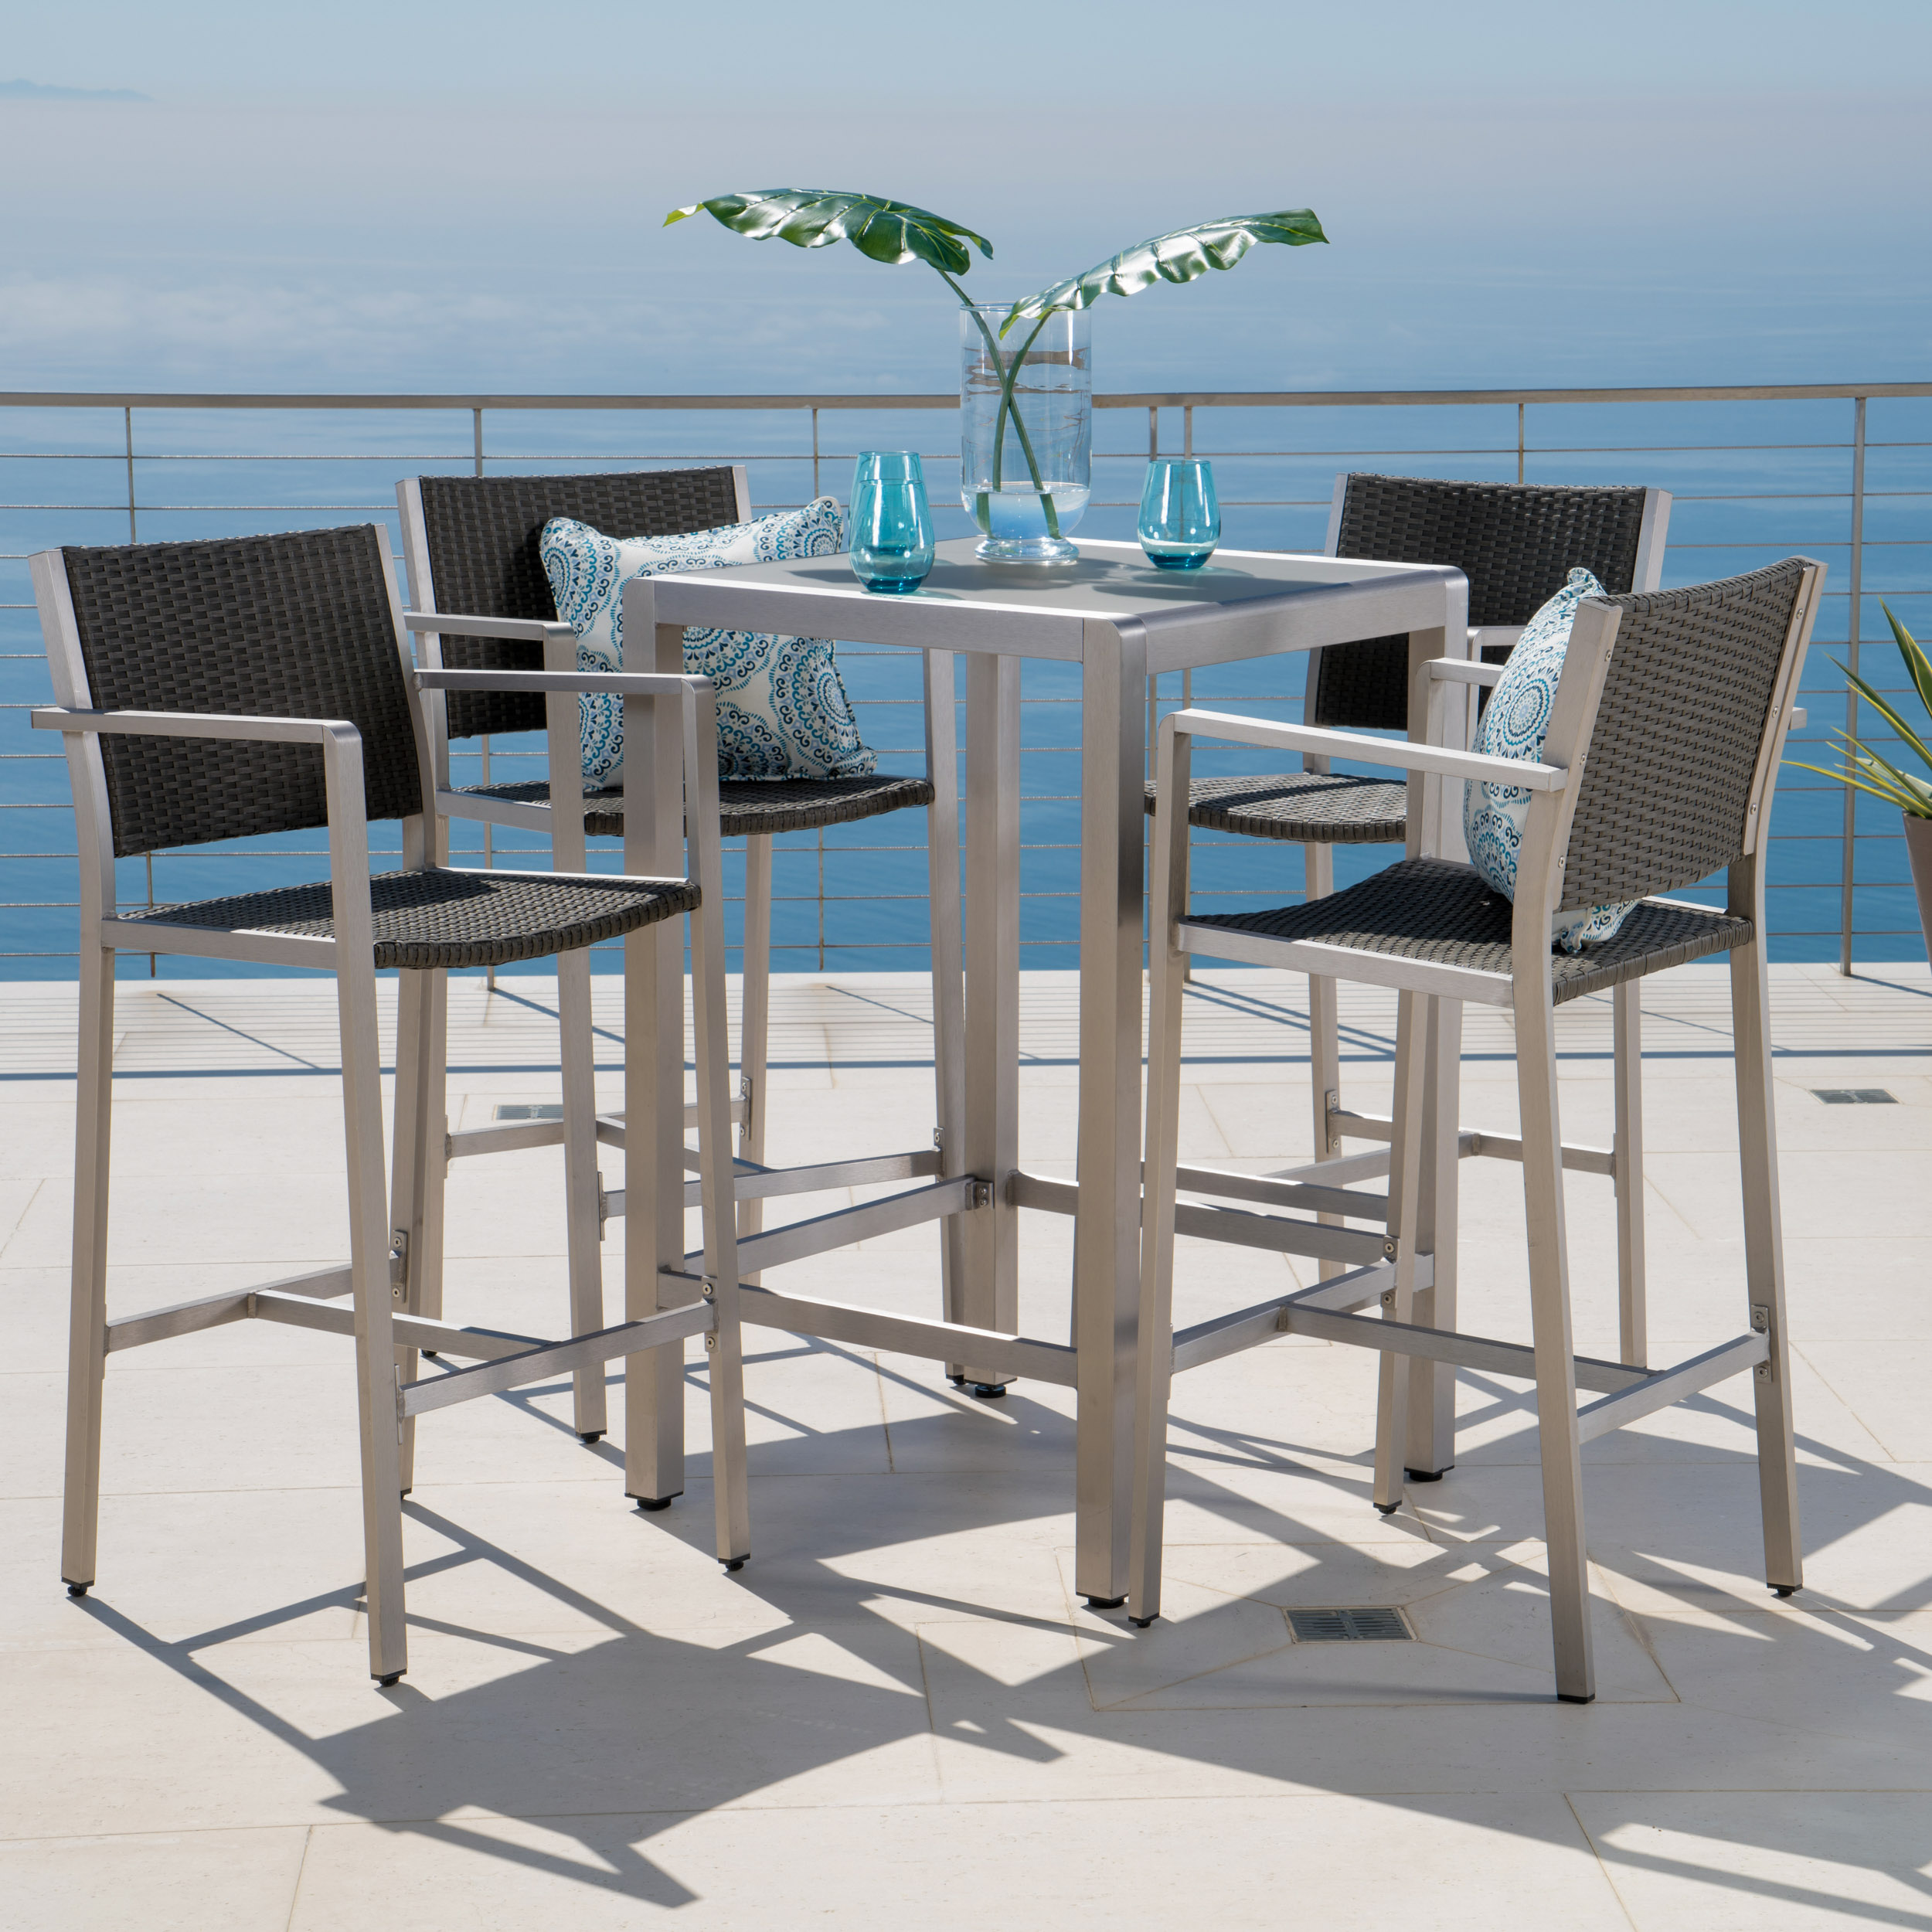 Miller Outdoor 5 Piece Wicker Bar Set with Glass Table Top, Grey - image 1 of 10